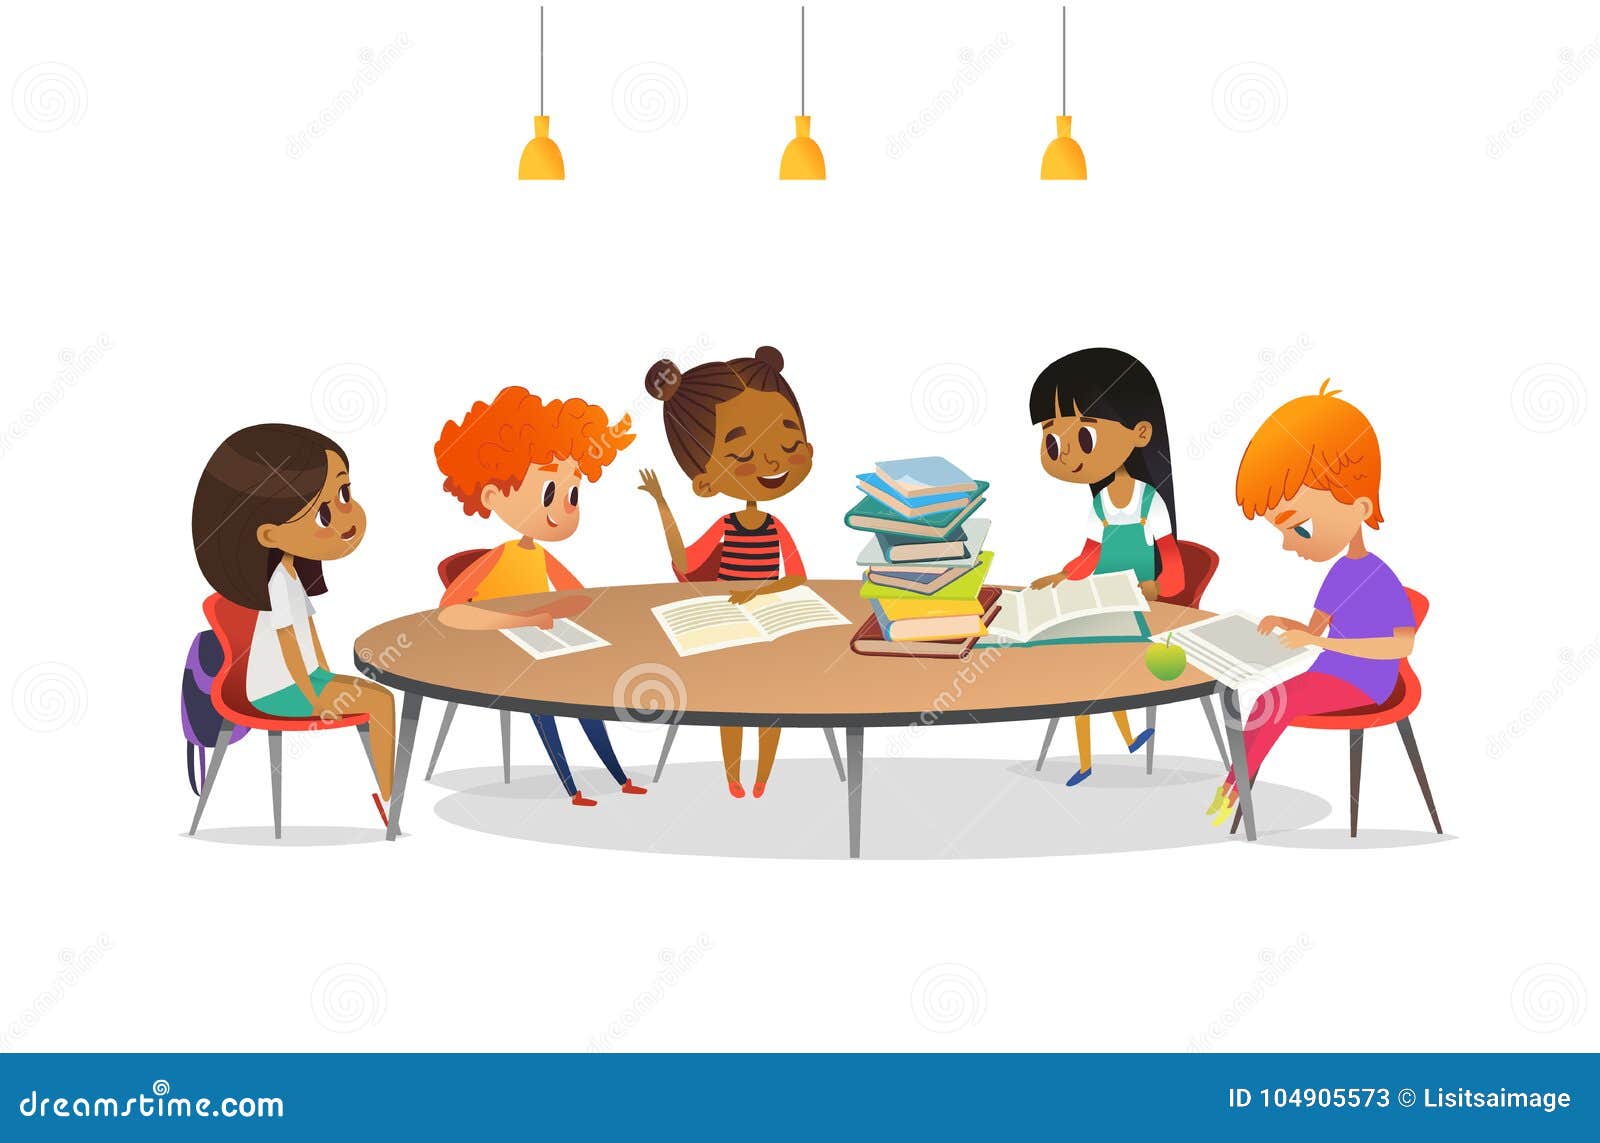 multiracial children sitting around round table with pile of books on it and listening to girl reading aloud. school